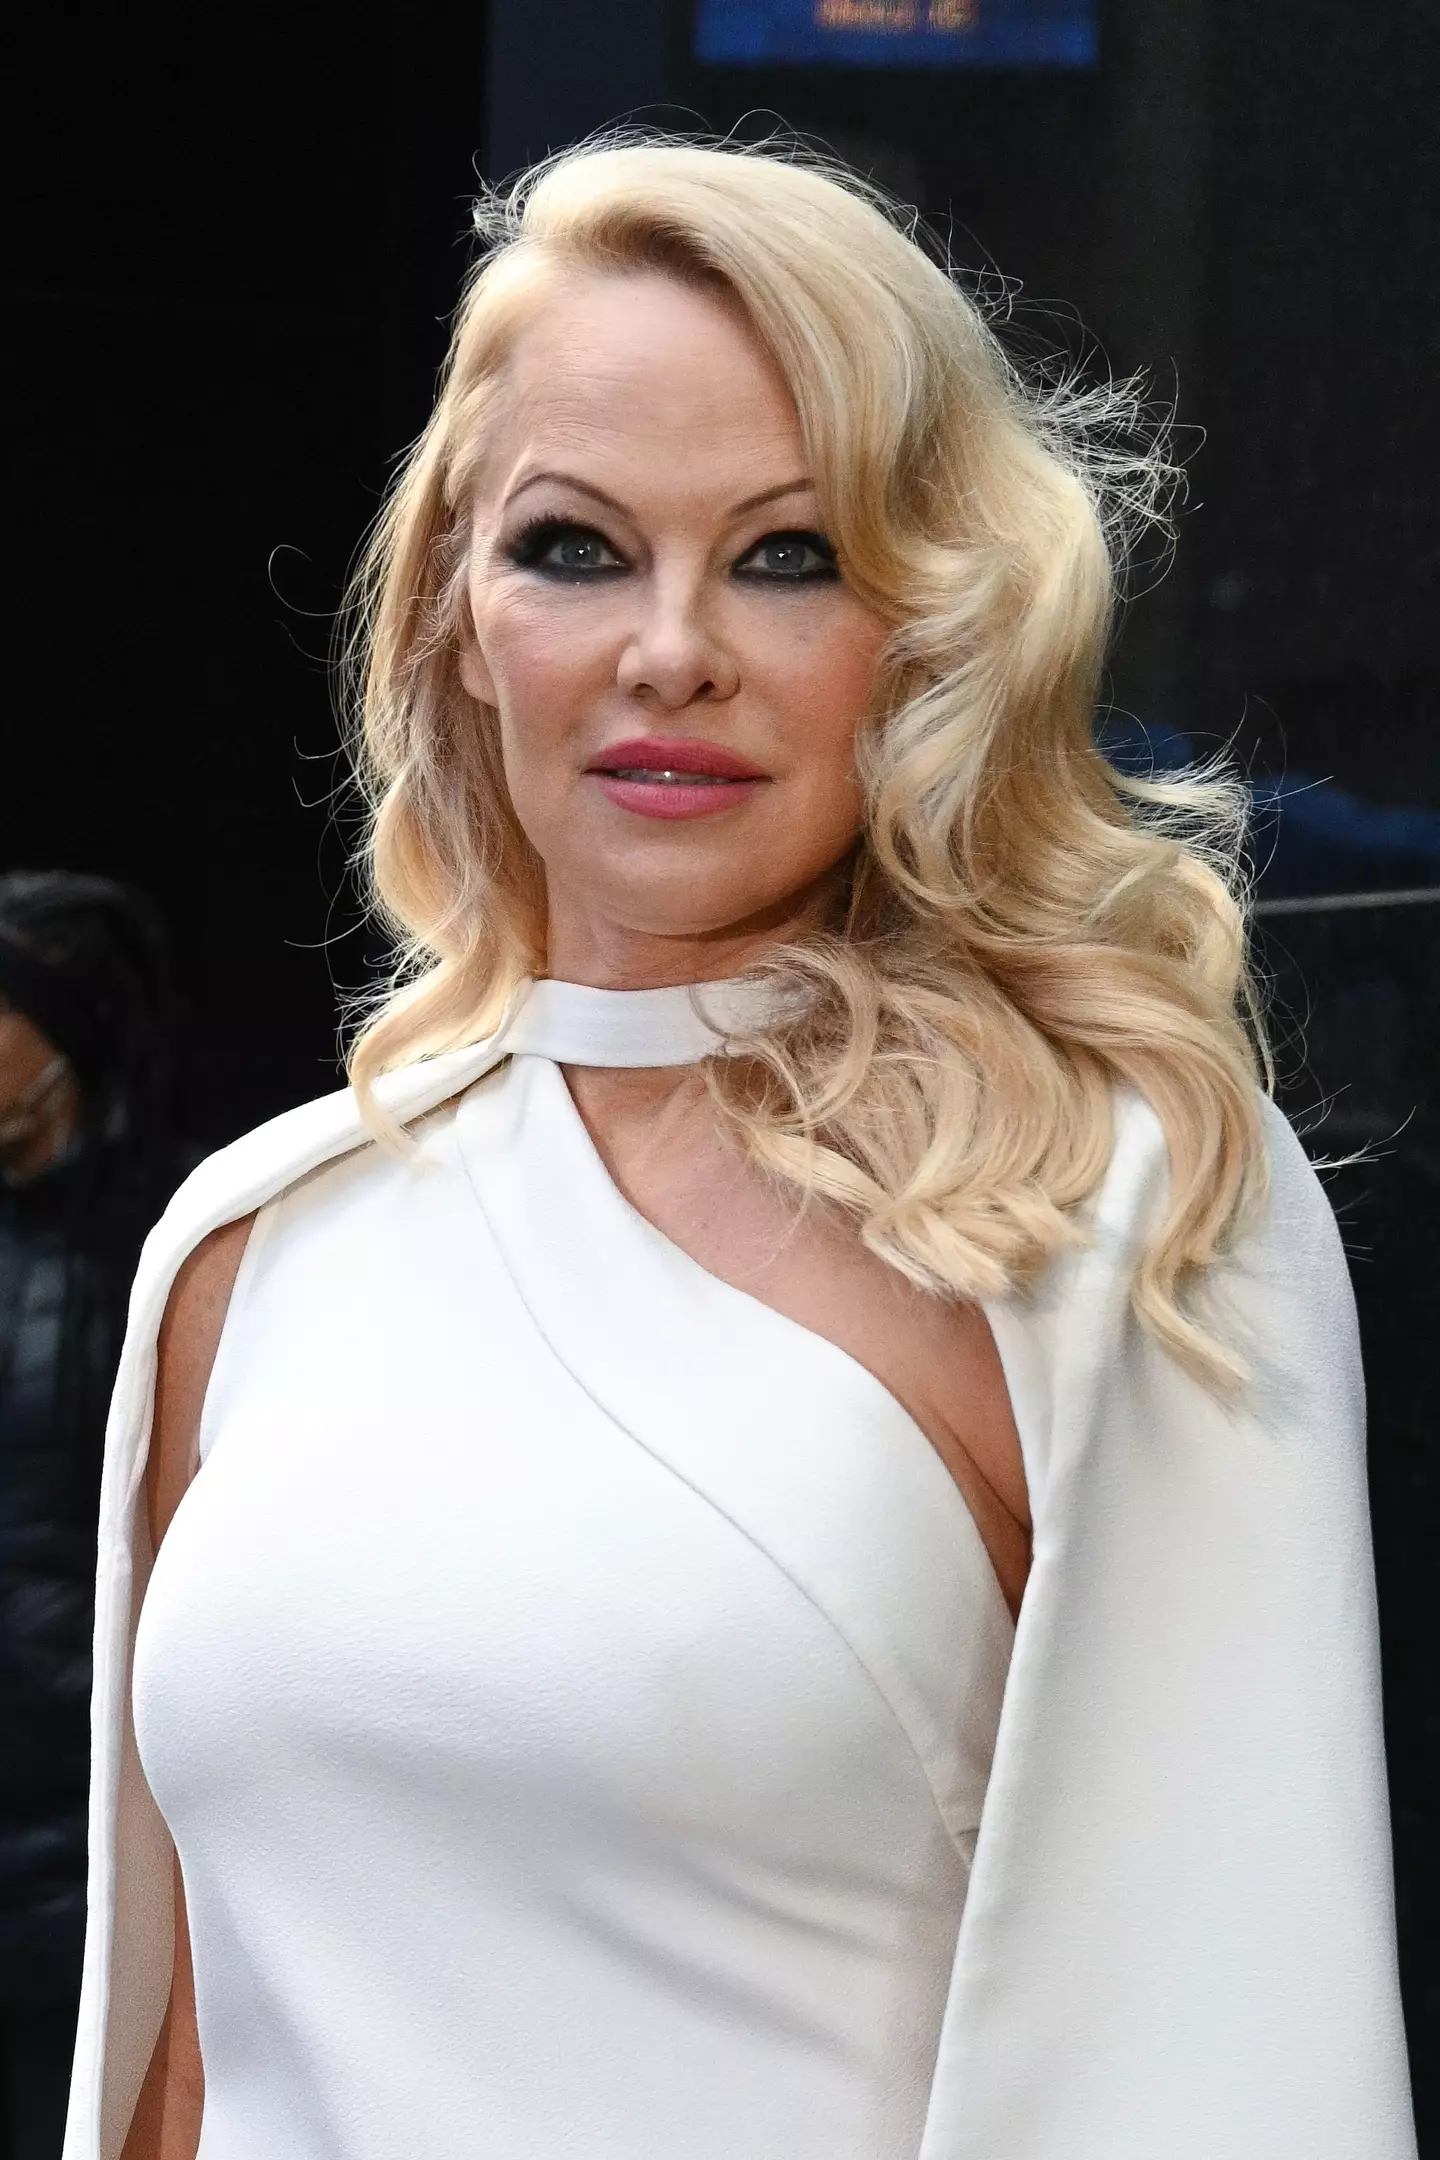 Pamela Anderson's angry ex-husband says he paid off her '$200k